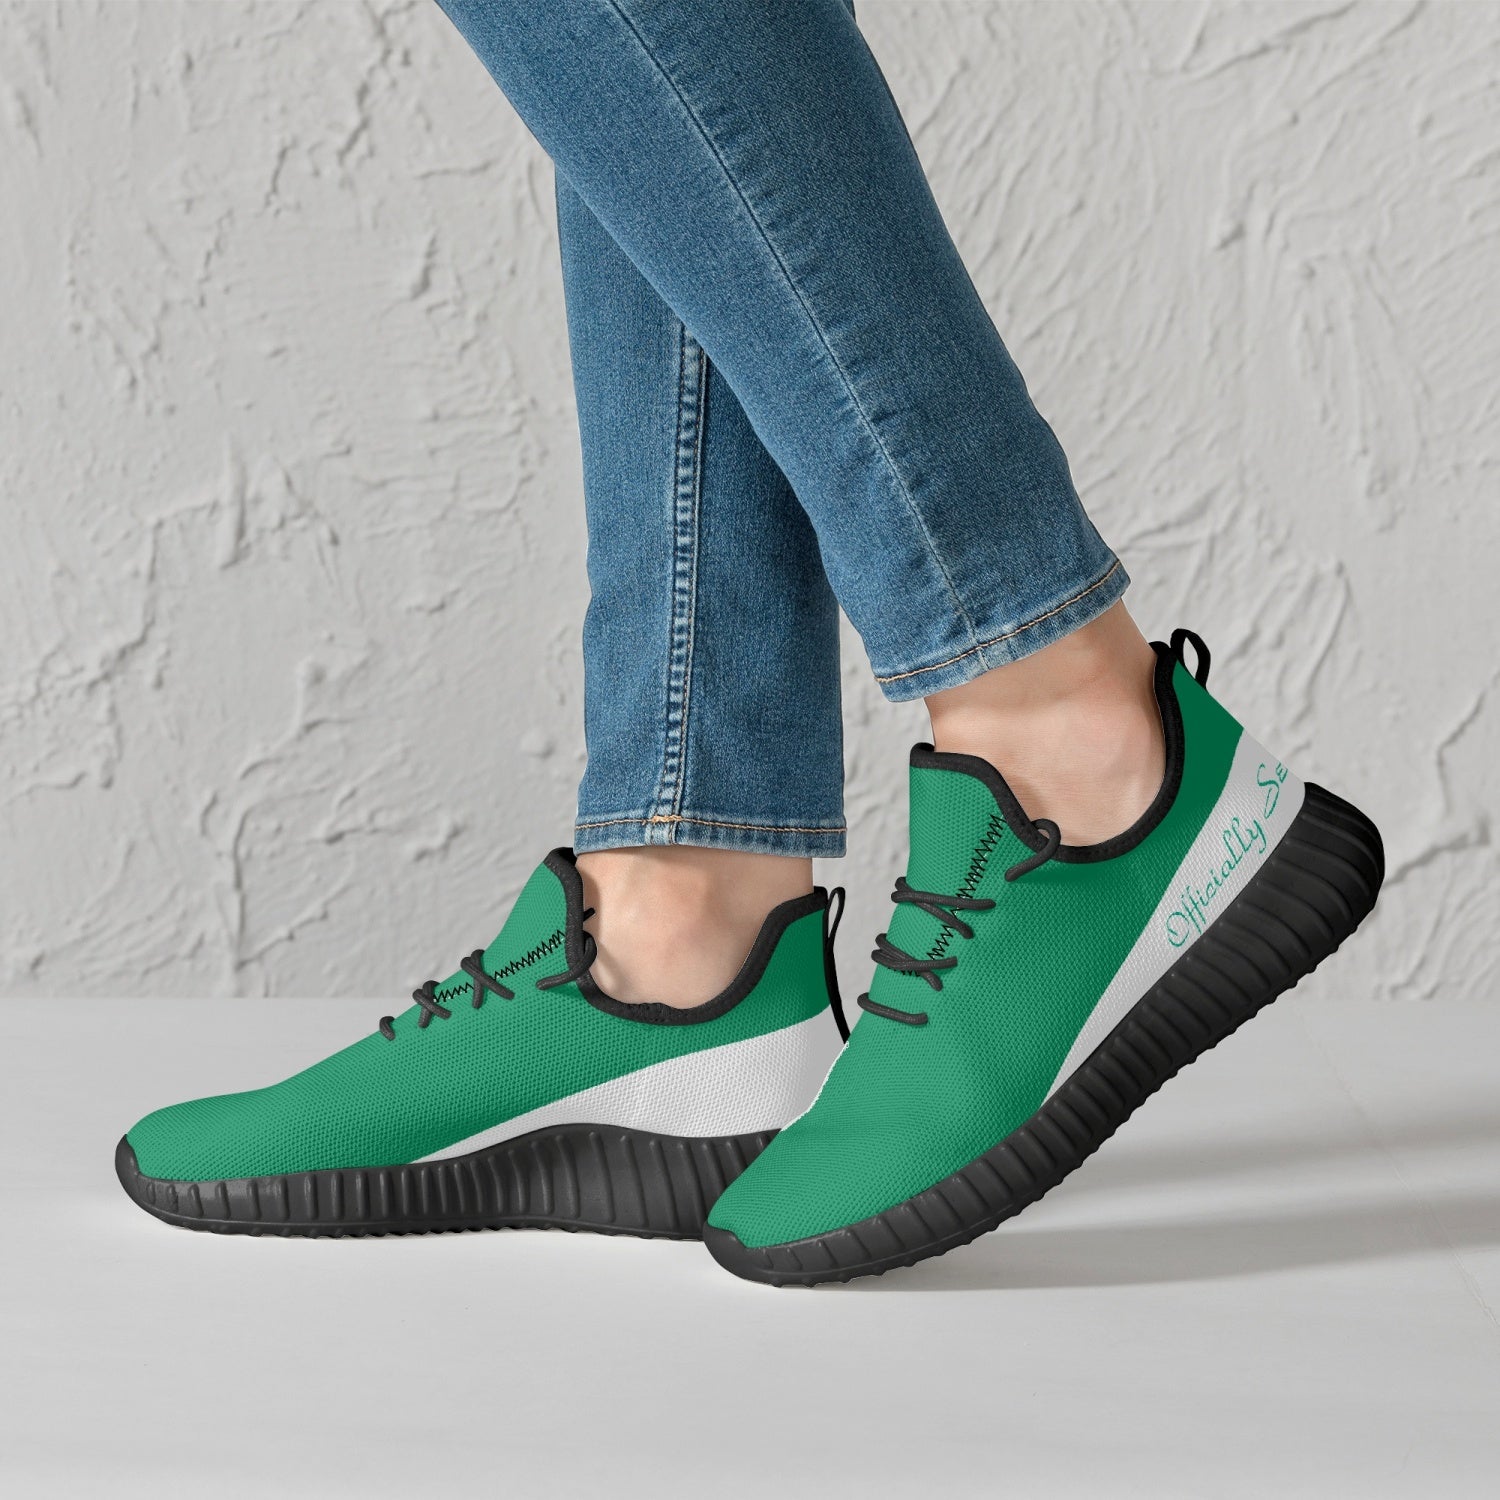 Officially Sexy Mint & White Laser Mesh Knit Sneakers - With White or Black Sole